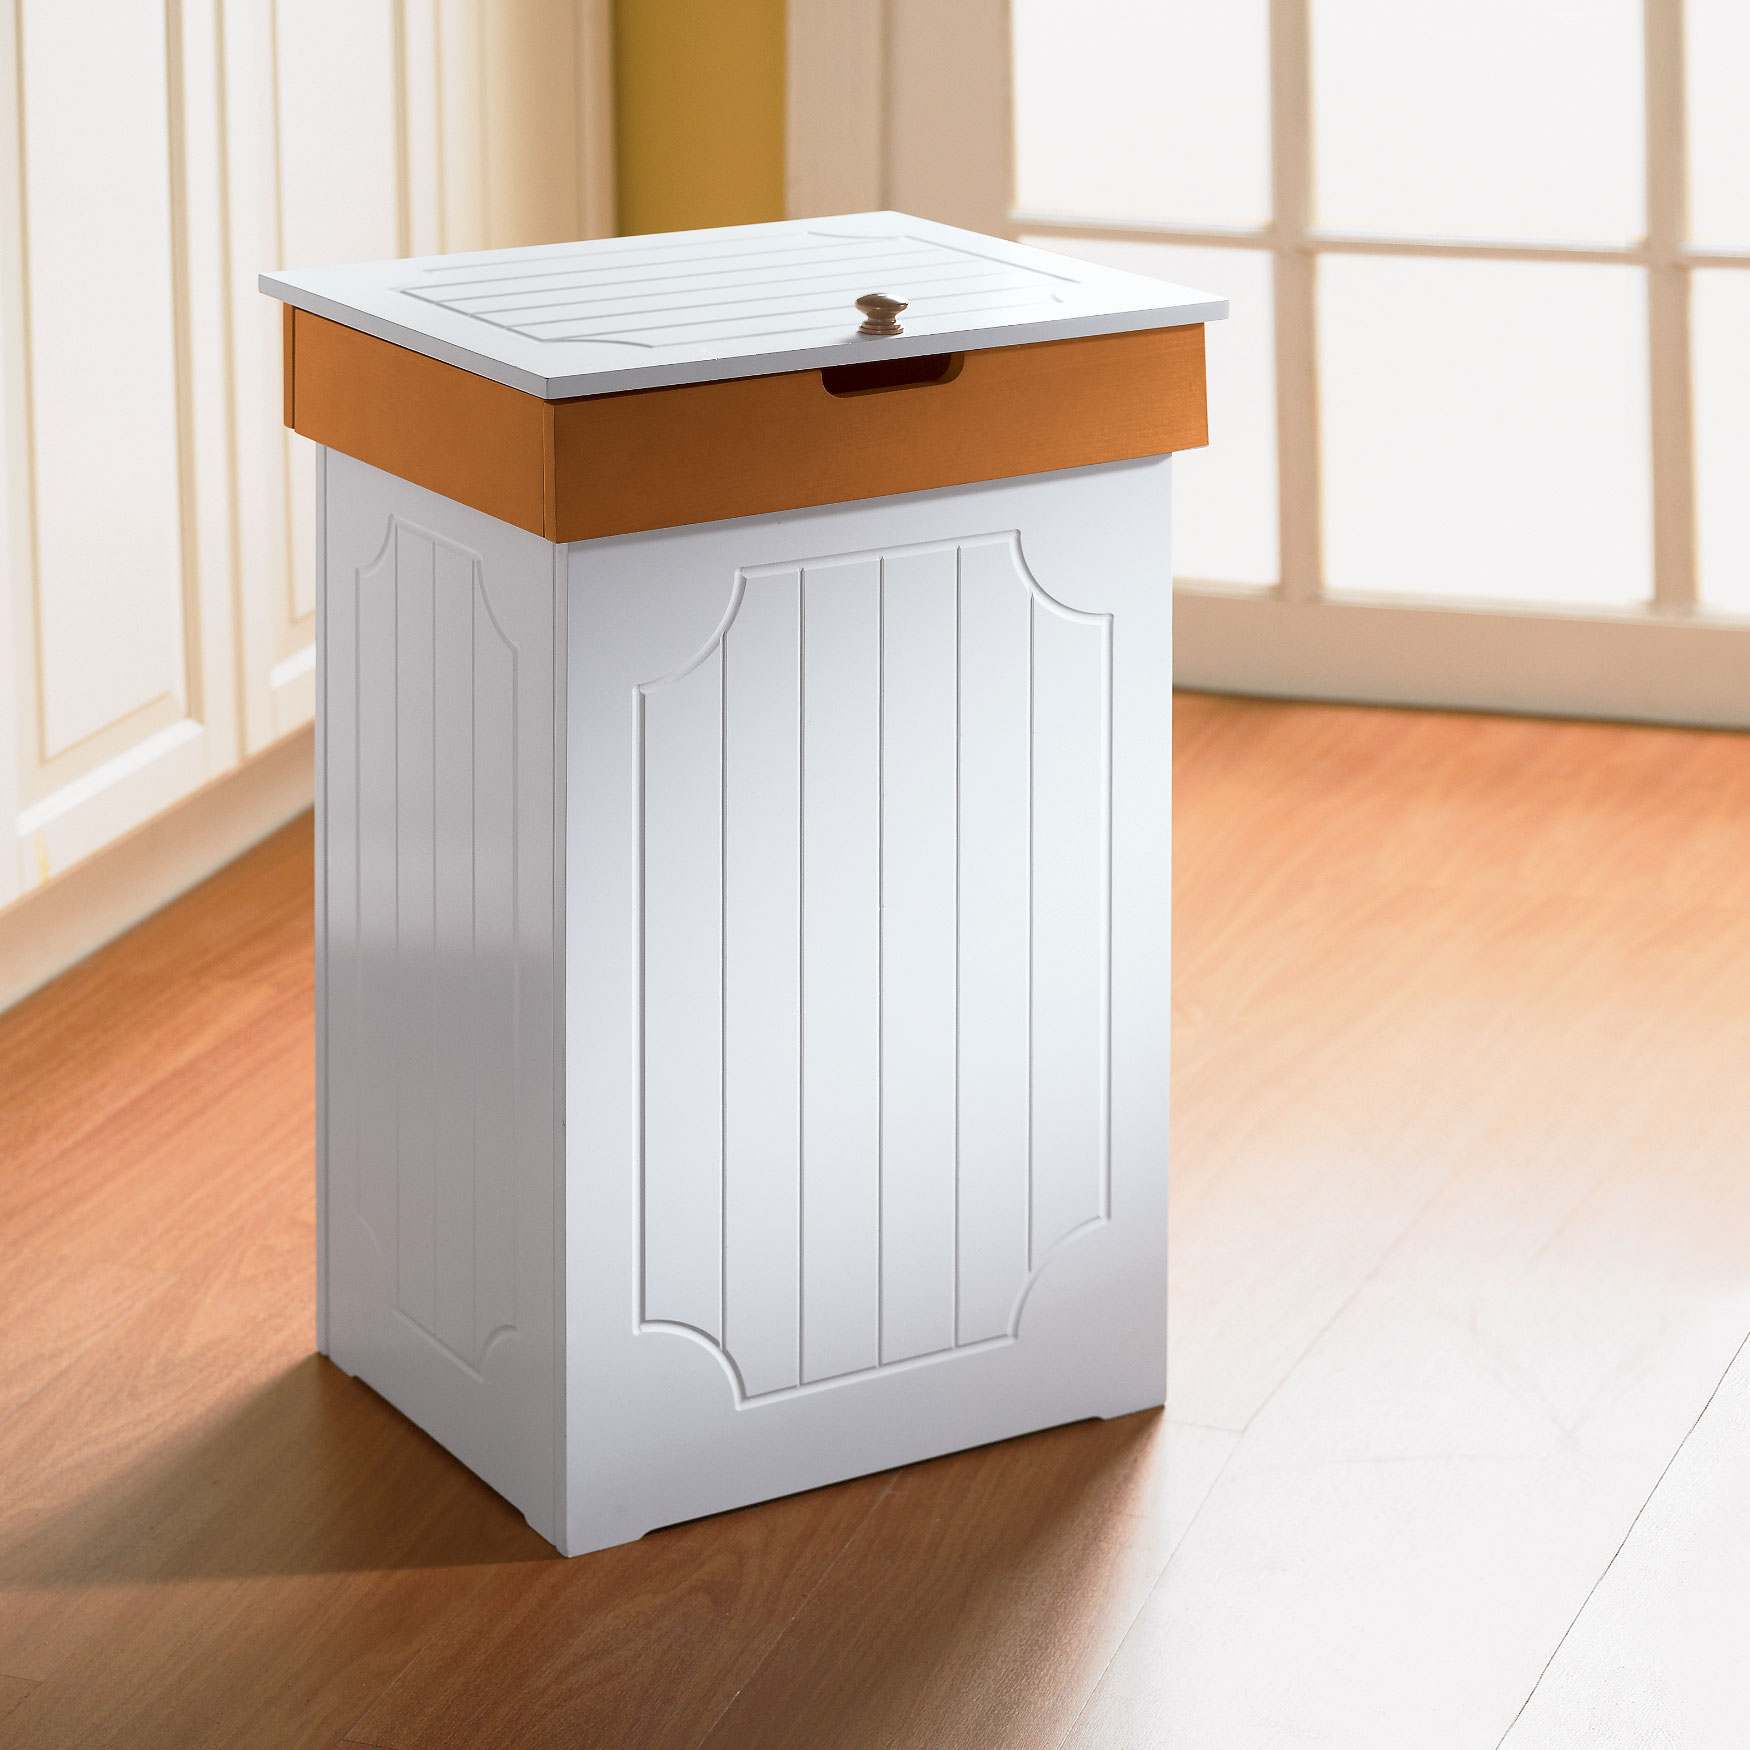 What Is The Standard Kitchen Trash Can Size